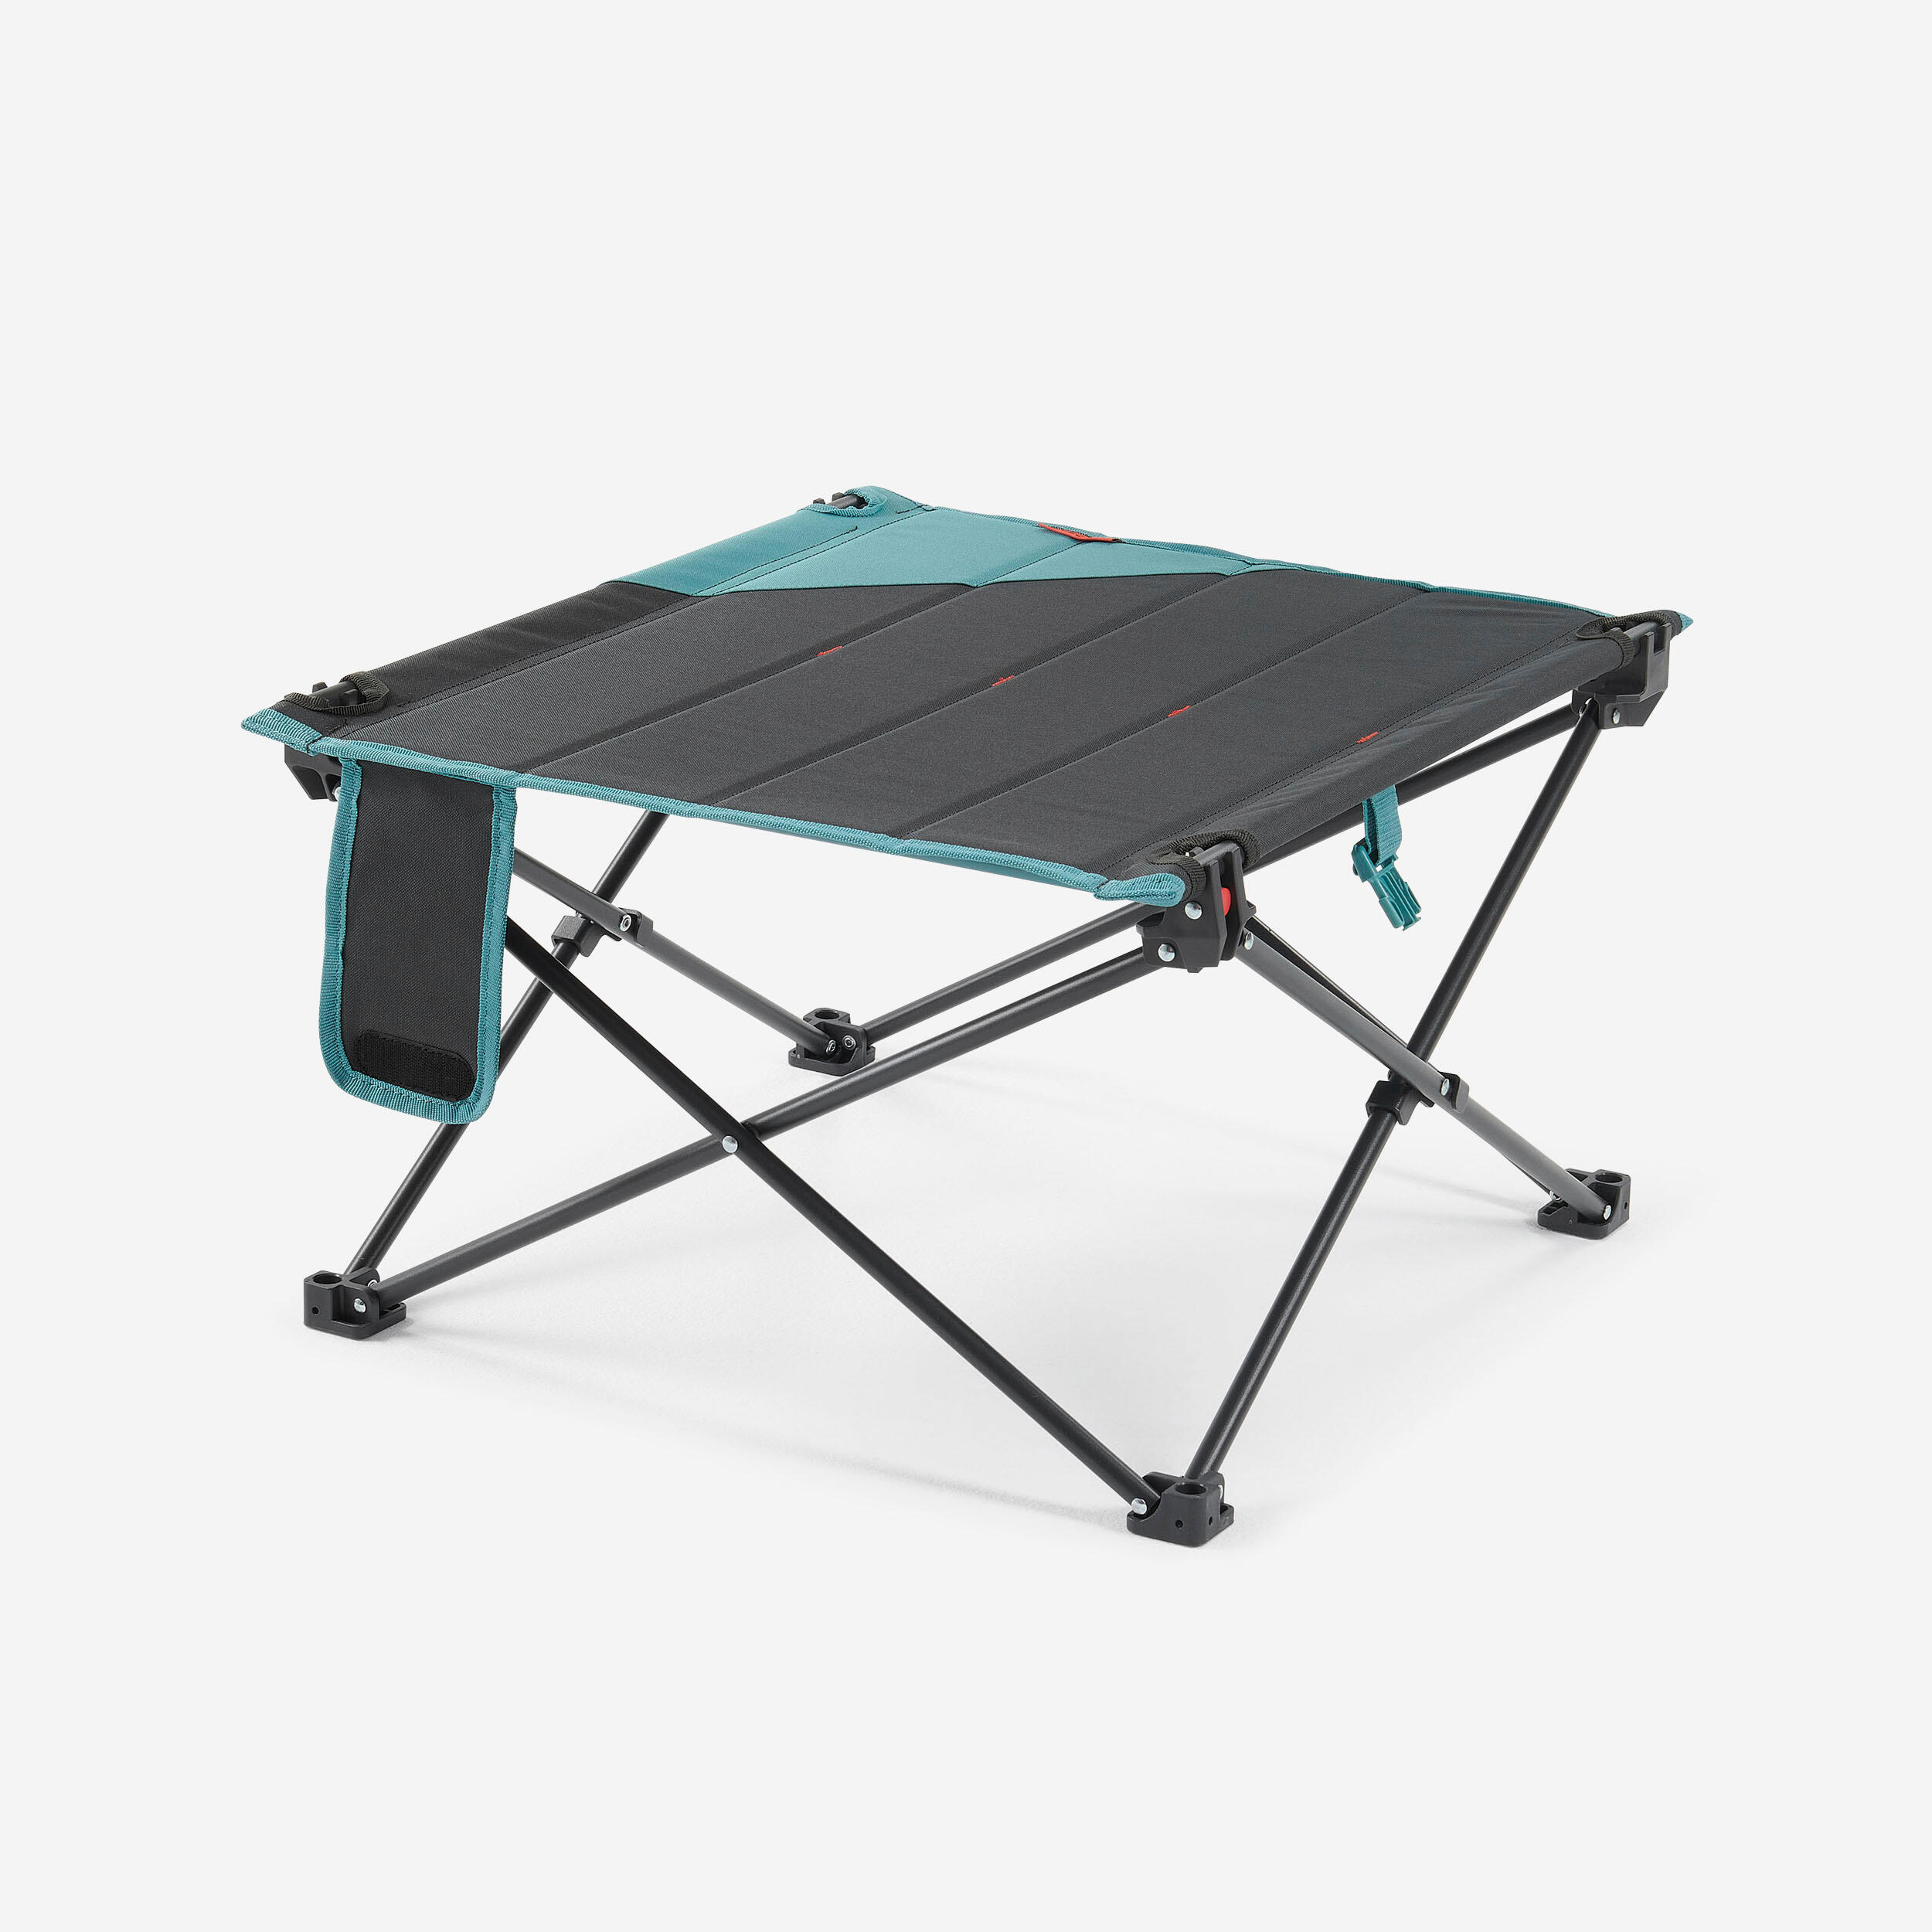 QUECHUA LOW FOLDING CAMPING TABLE MH100 Grey